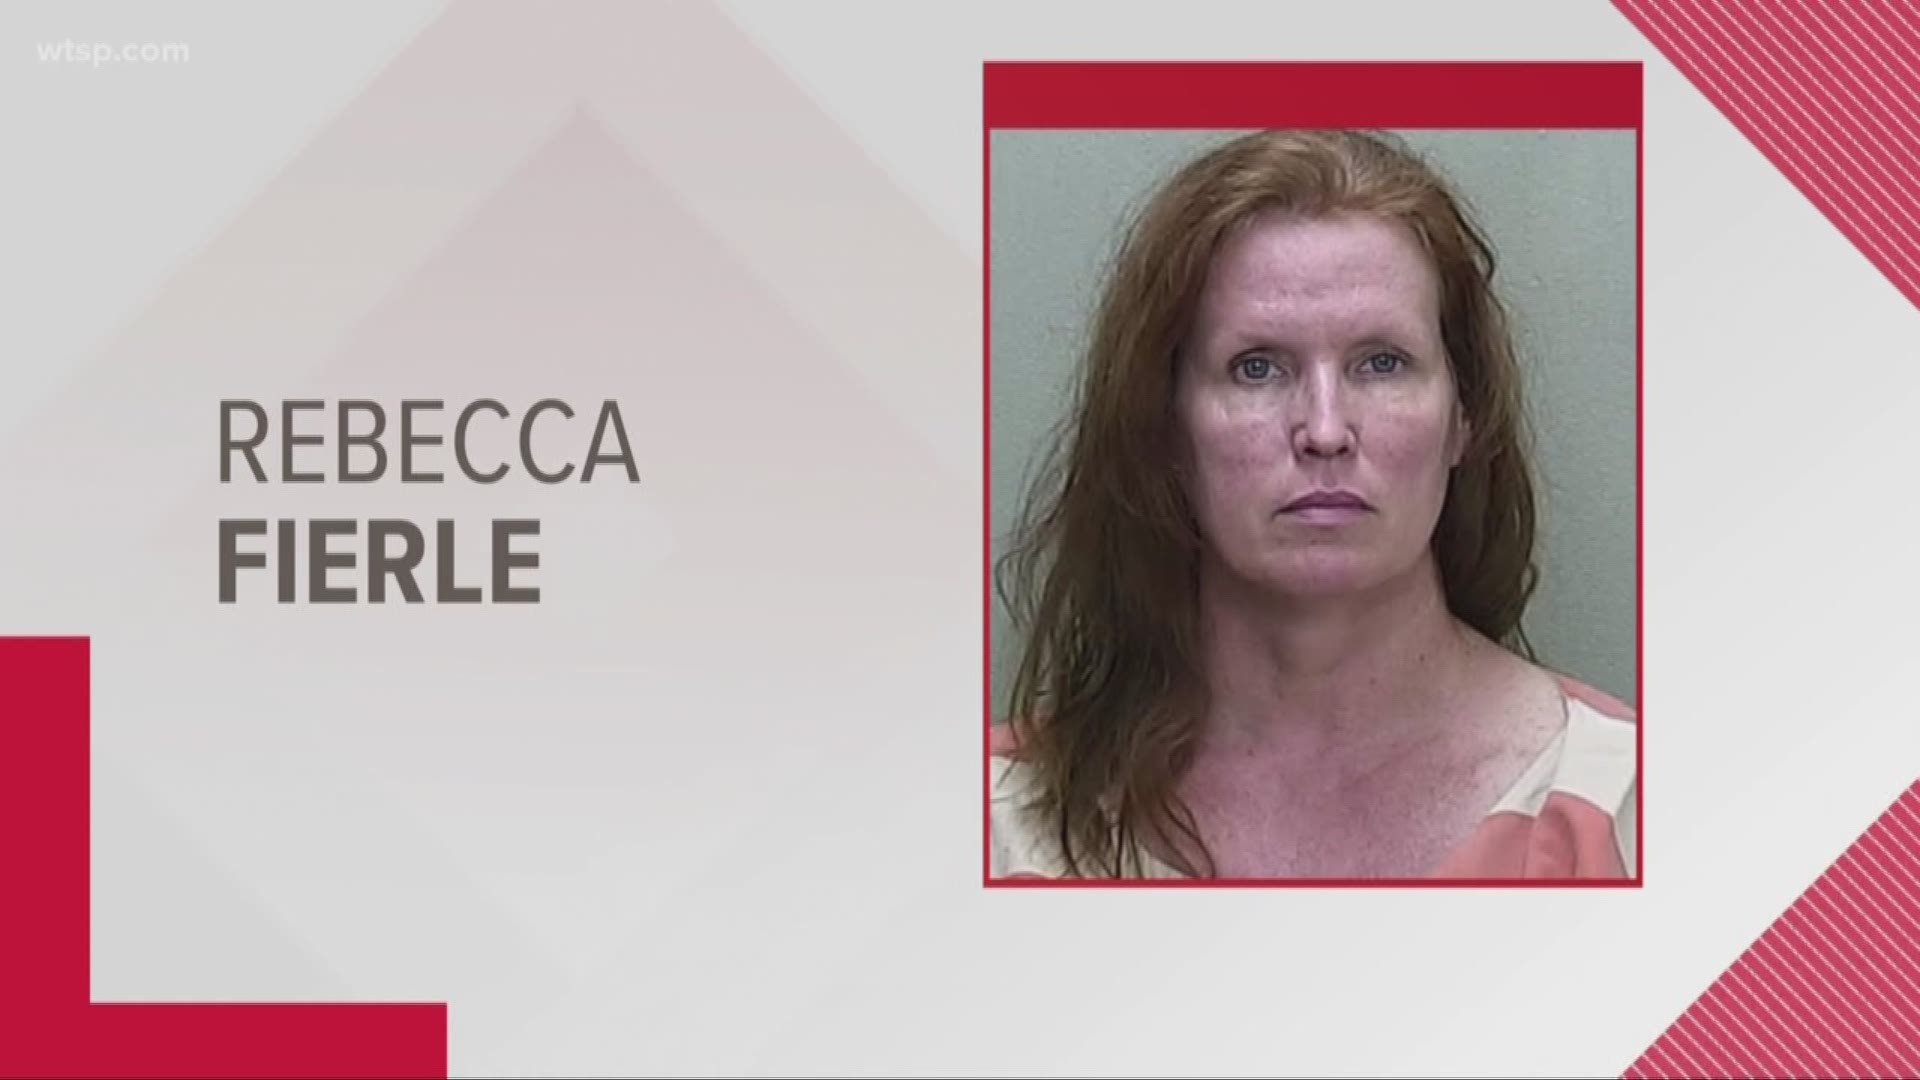 Former Florida guardian Rebecca Fierle, who has been accused of placing "do not resuscitate" orders on clients without their permission, was arrested.